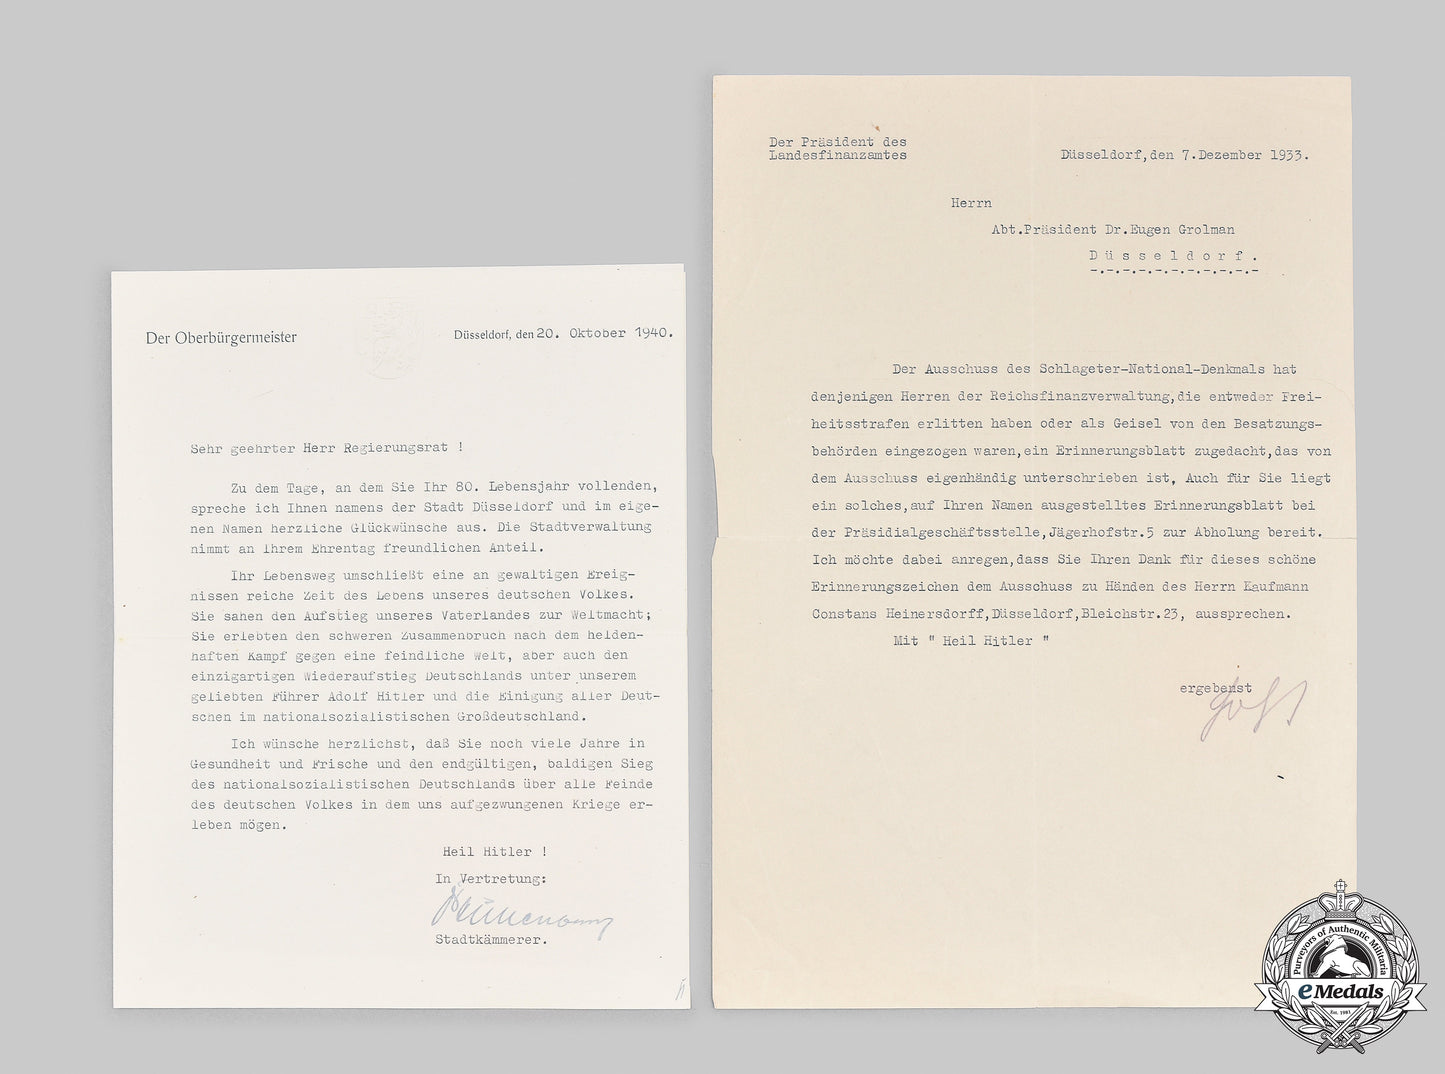 germany,_third_reich._a_collection_of_documents_to_düsseldorf_city_councillor,_c.1940_m21_0031_mnc7115_1